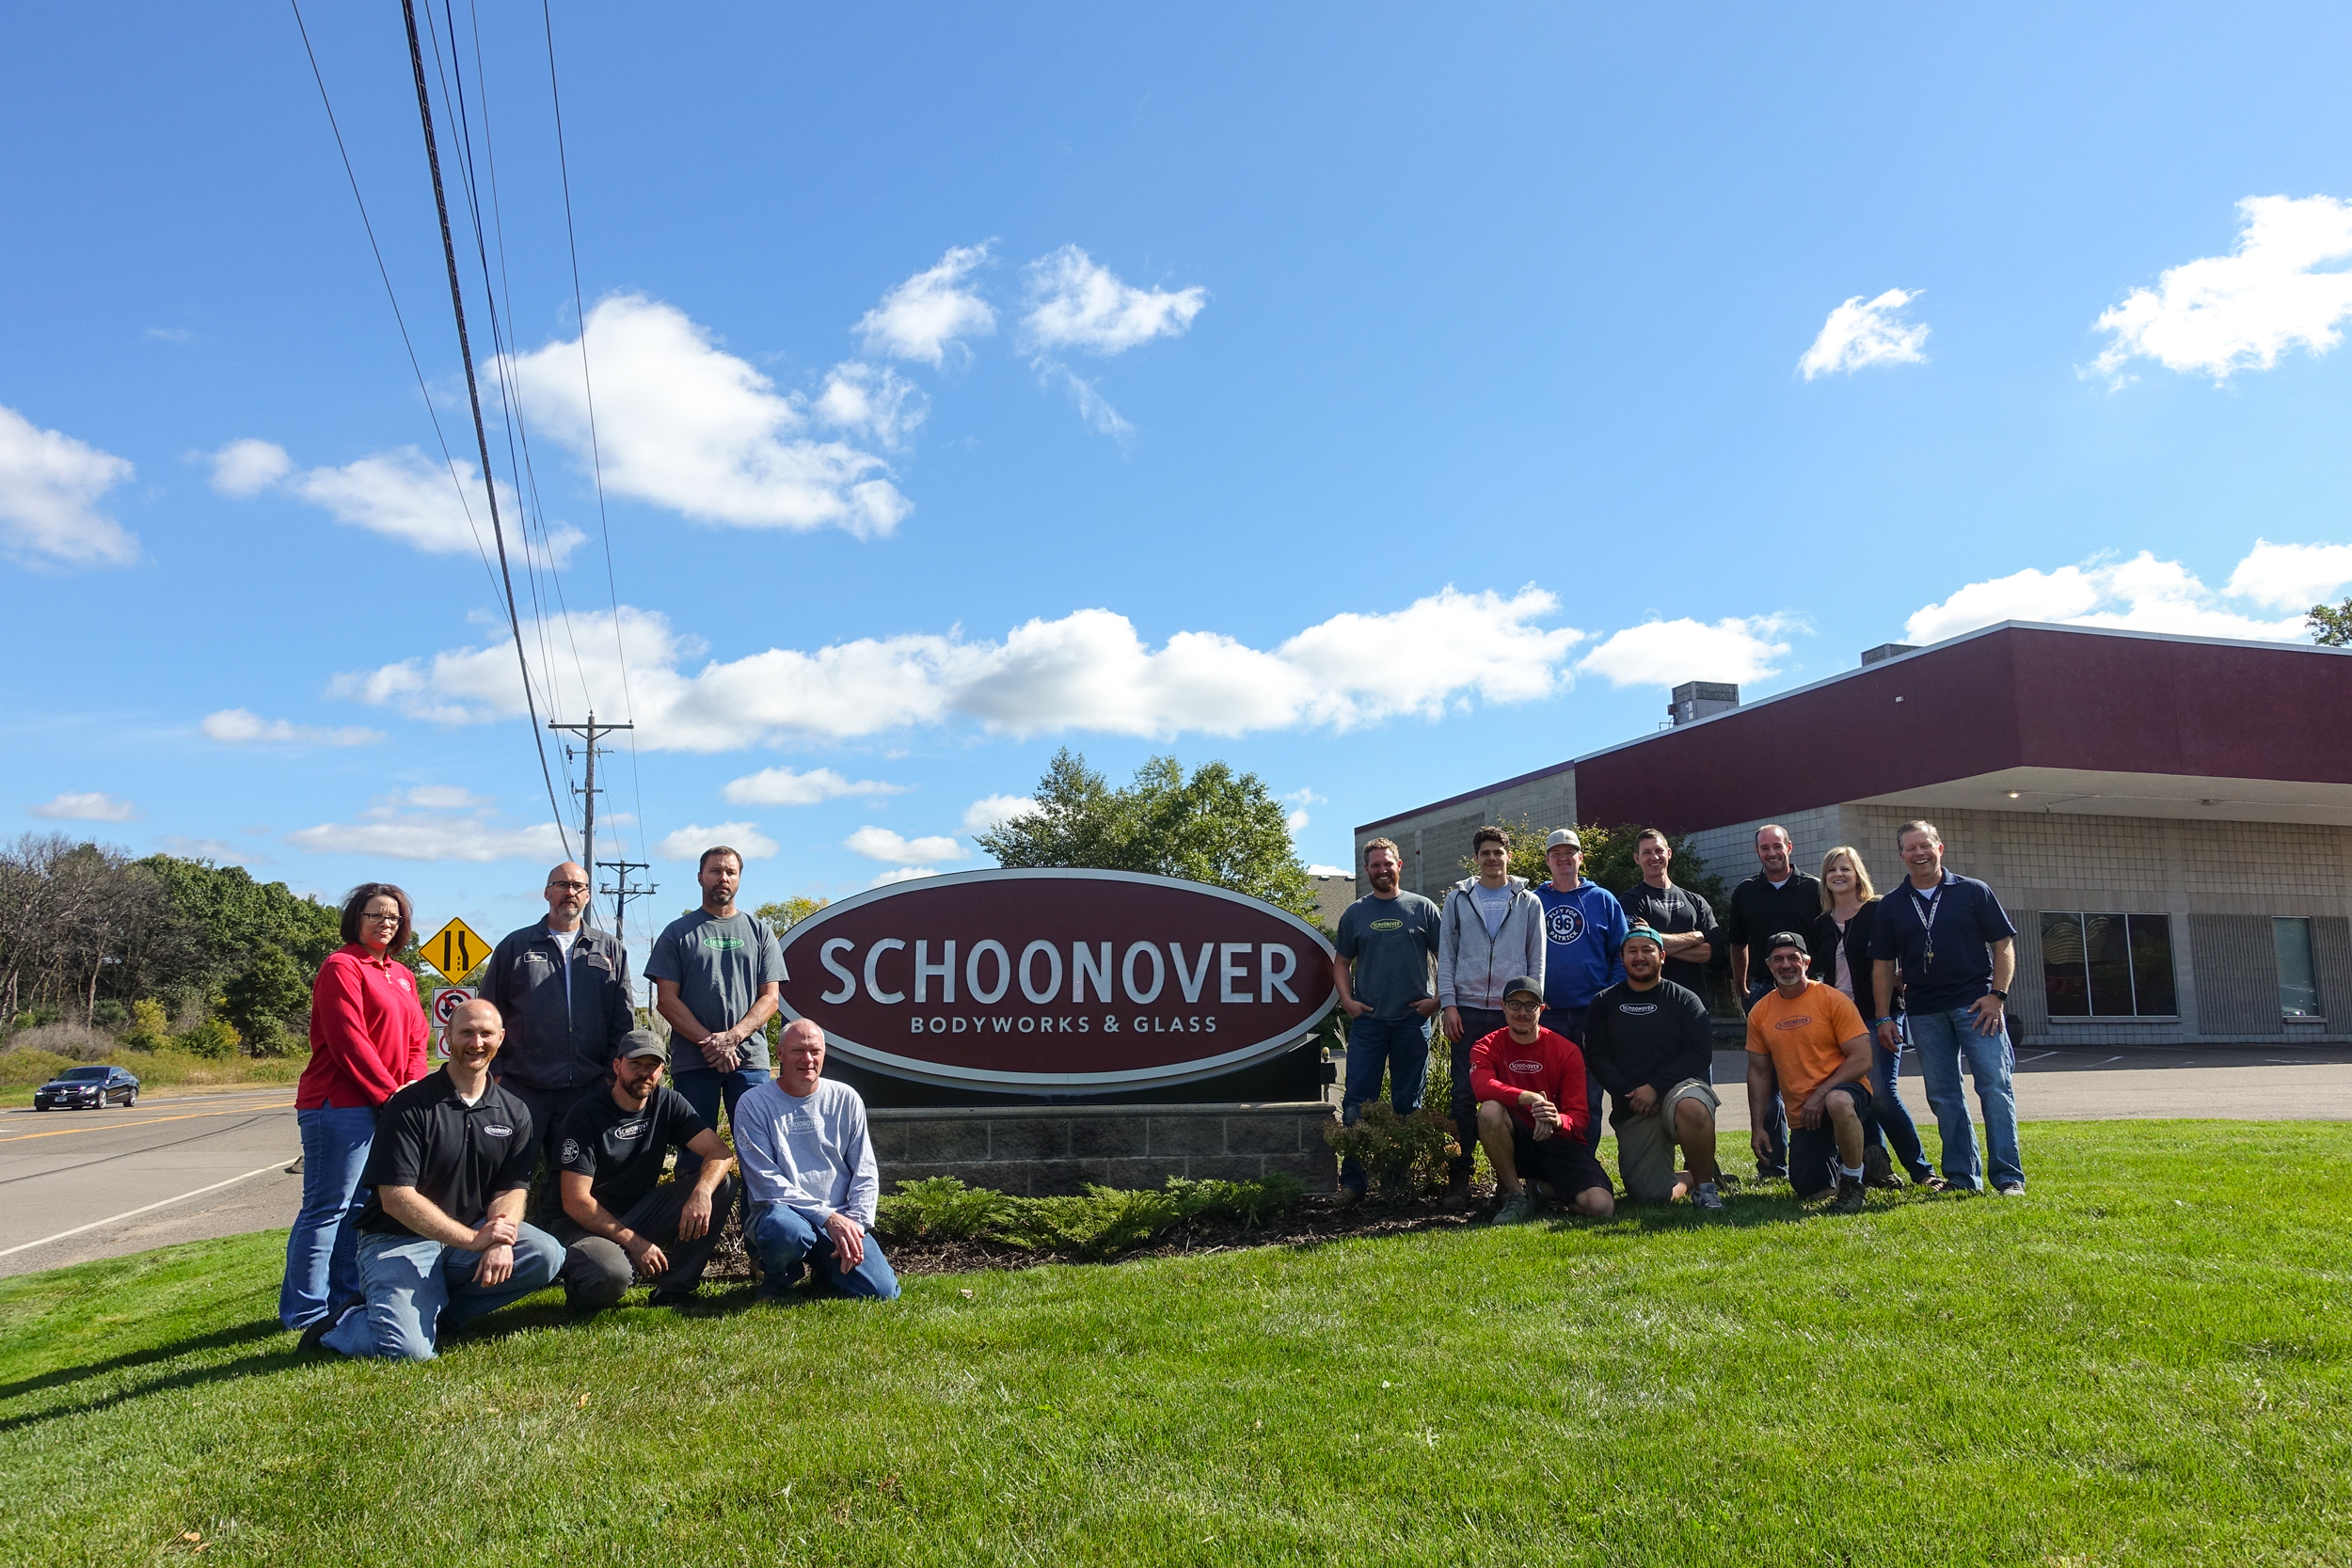 Schoonover Bodyworks overhauls their Reviews, Leads, and Customer Communication with Podium